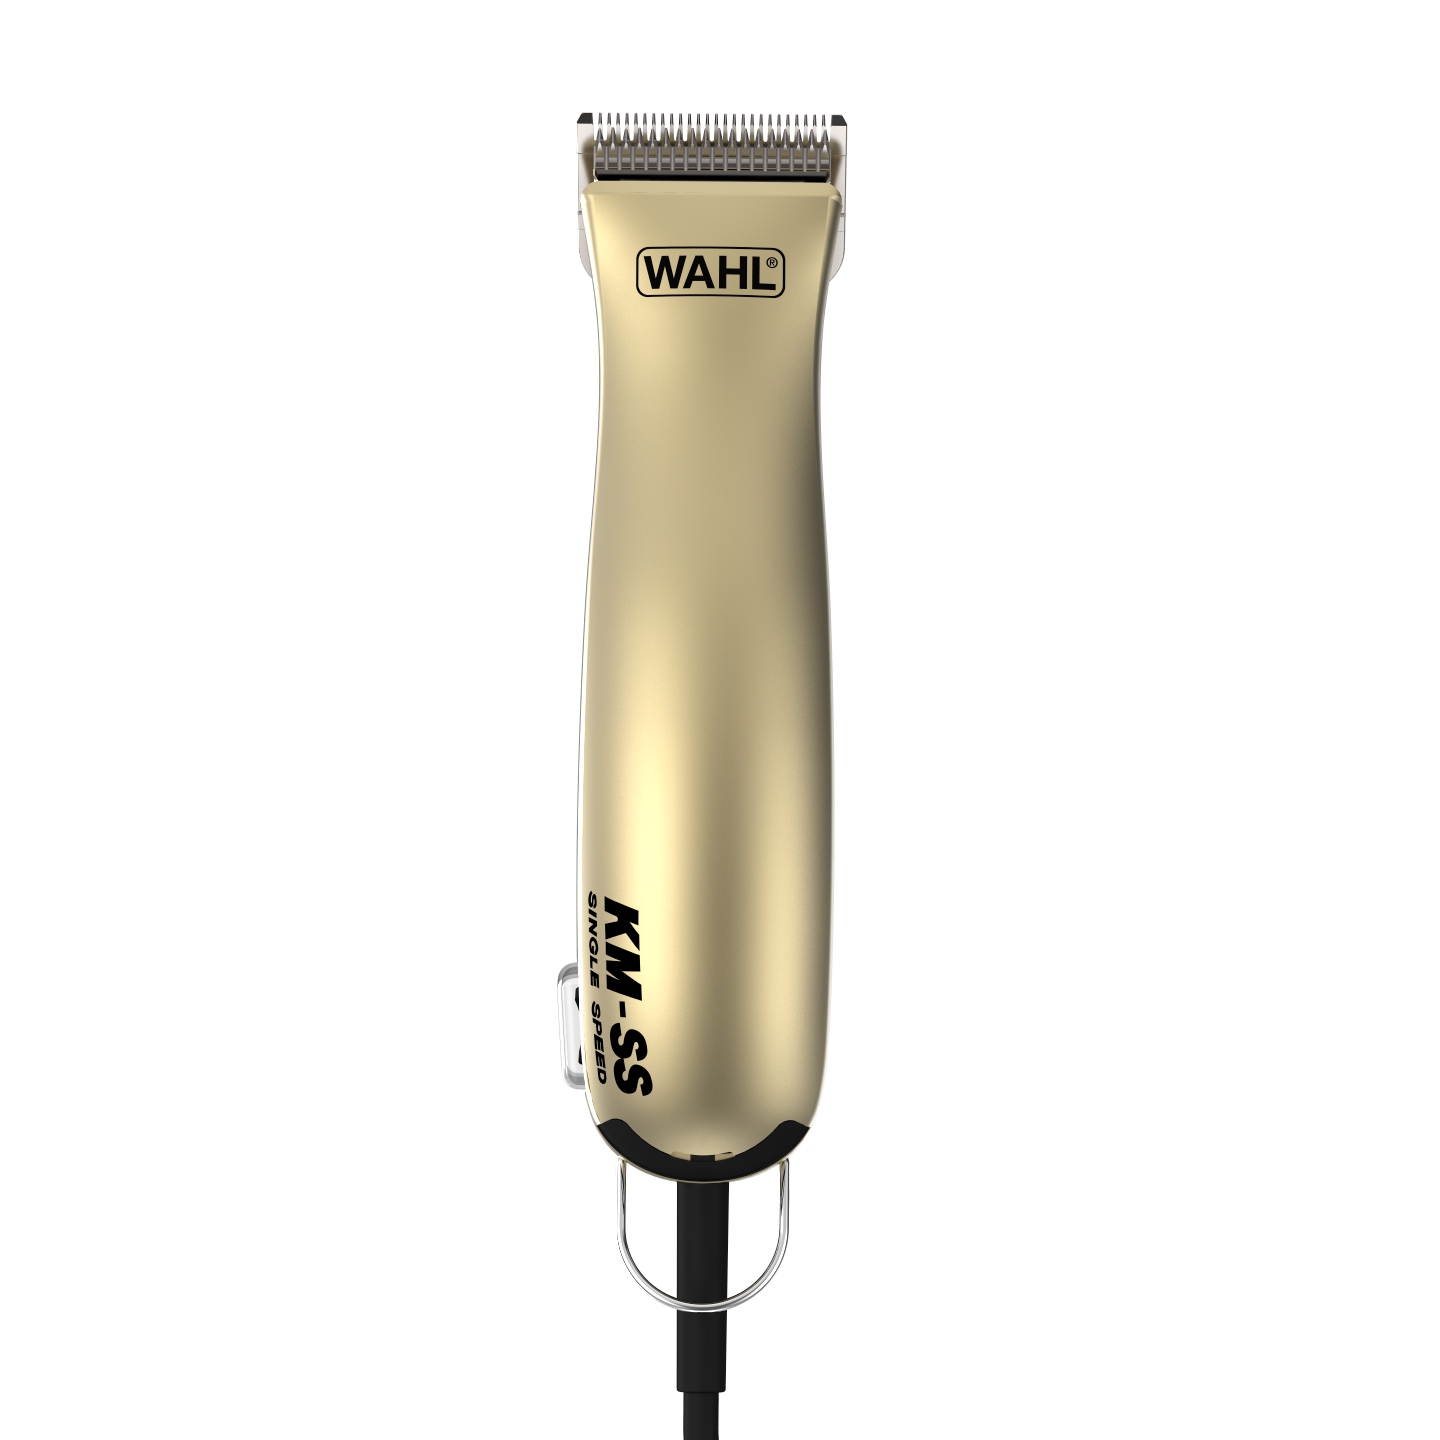 Wahl dog grooming clippers uk